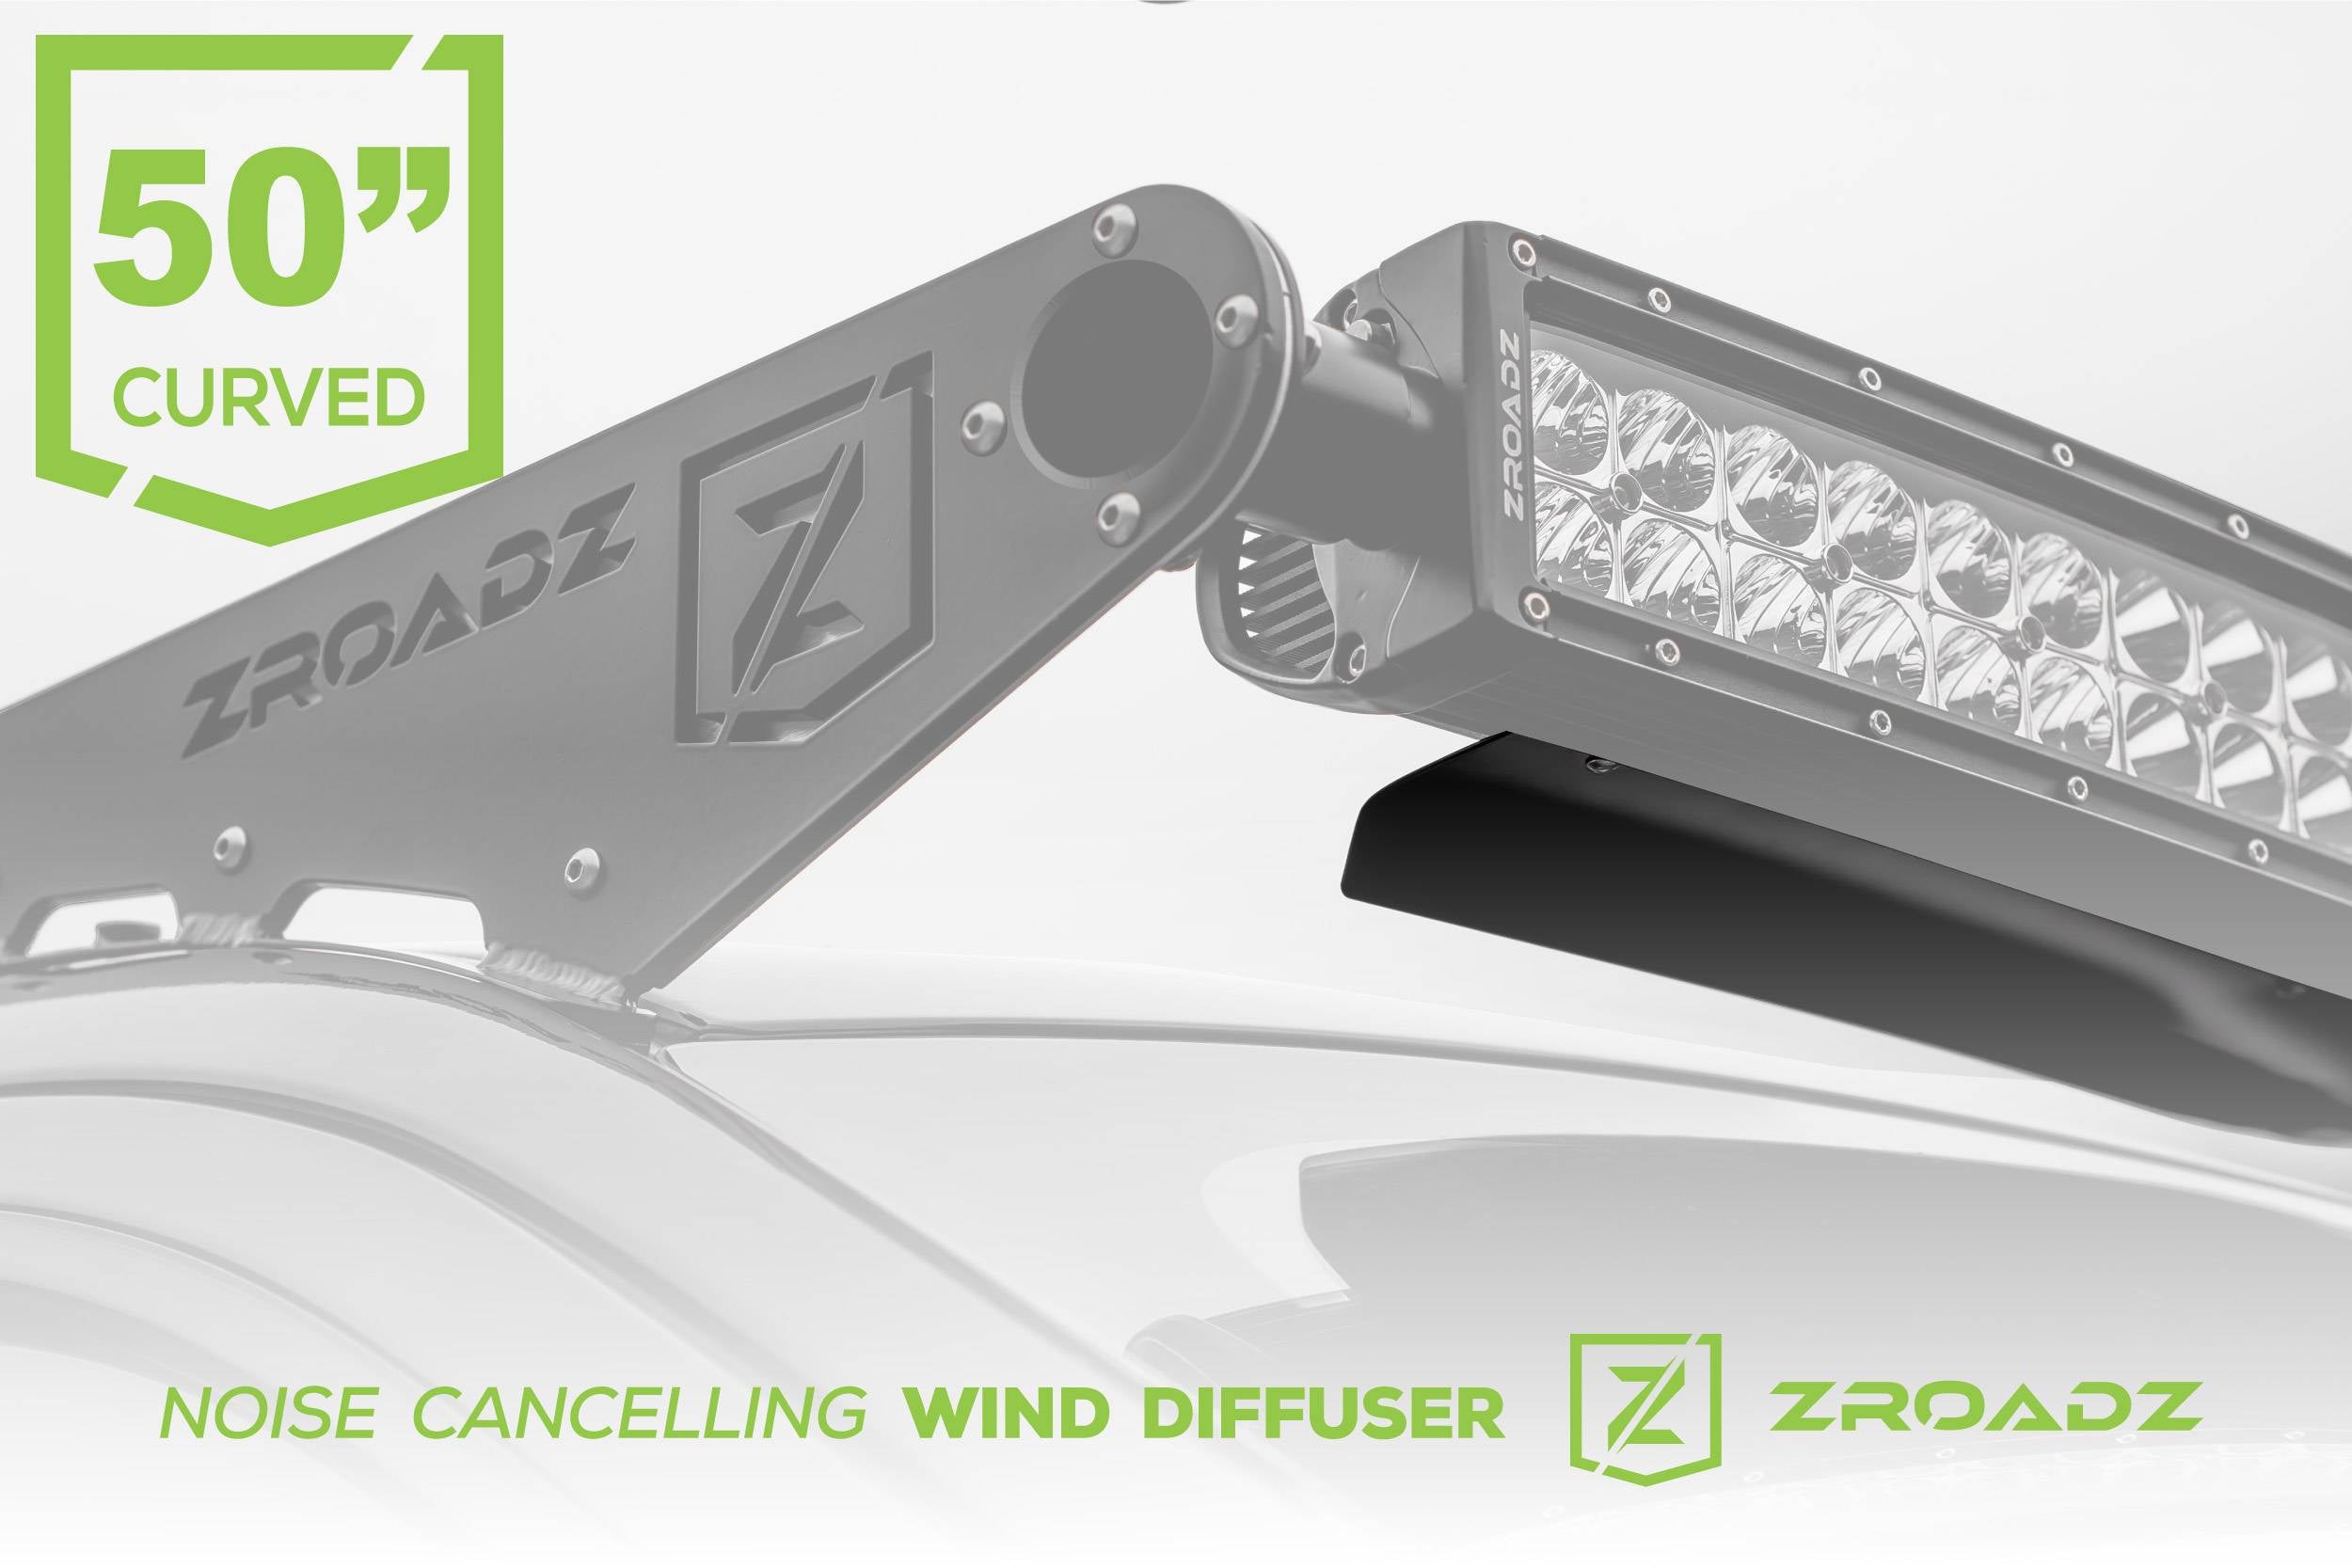 ZROADZ 50" Noise Cancelling Wind Diffuser Curved LED Light Bar Z330050C